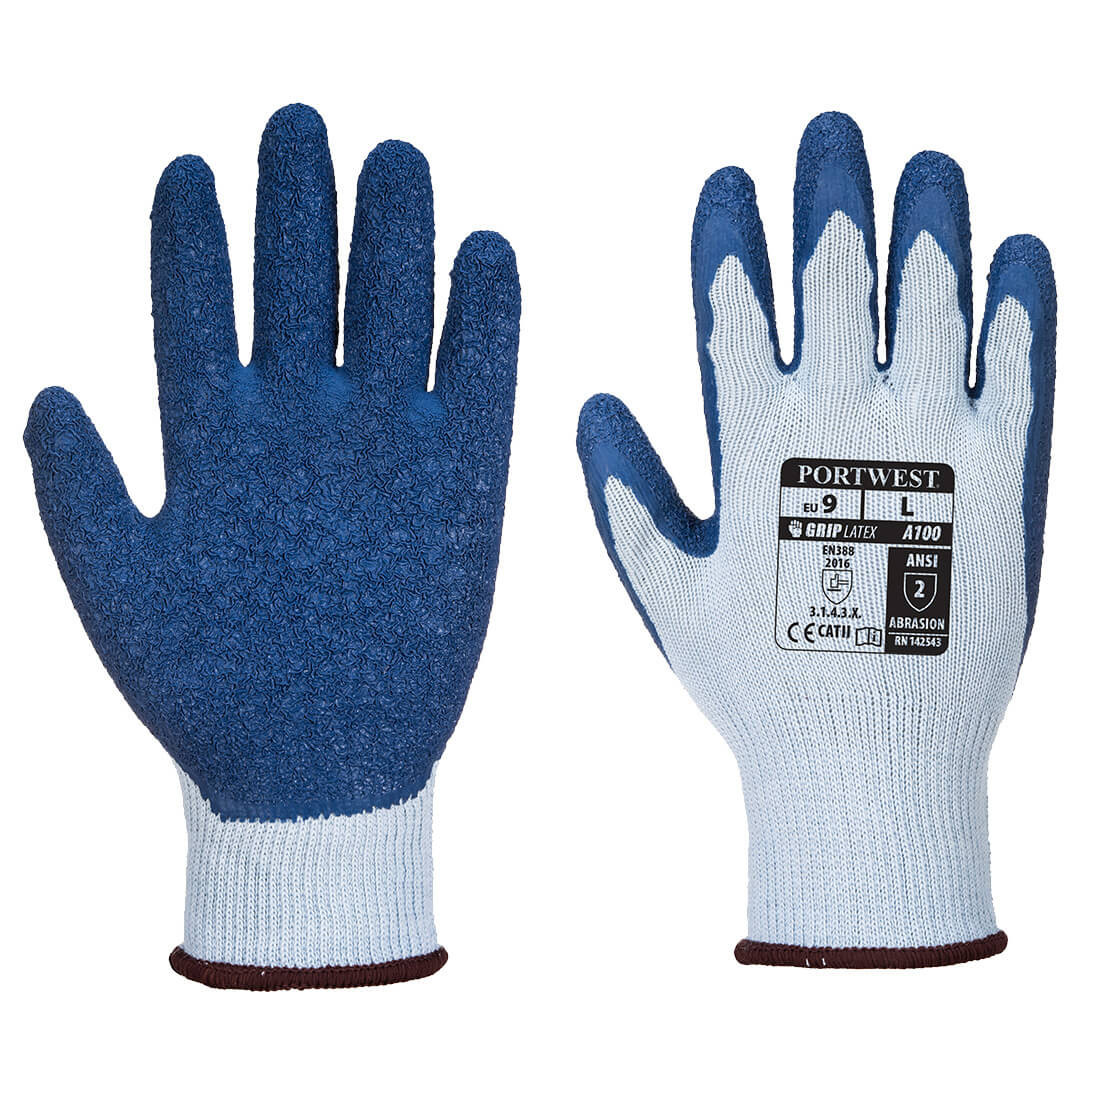 Grip Glove - Personal protection